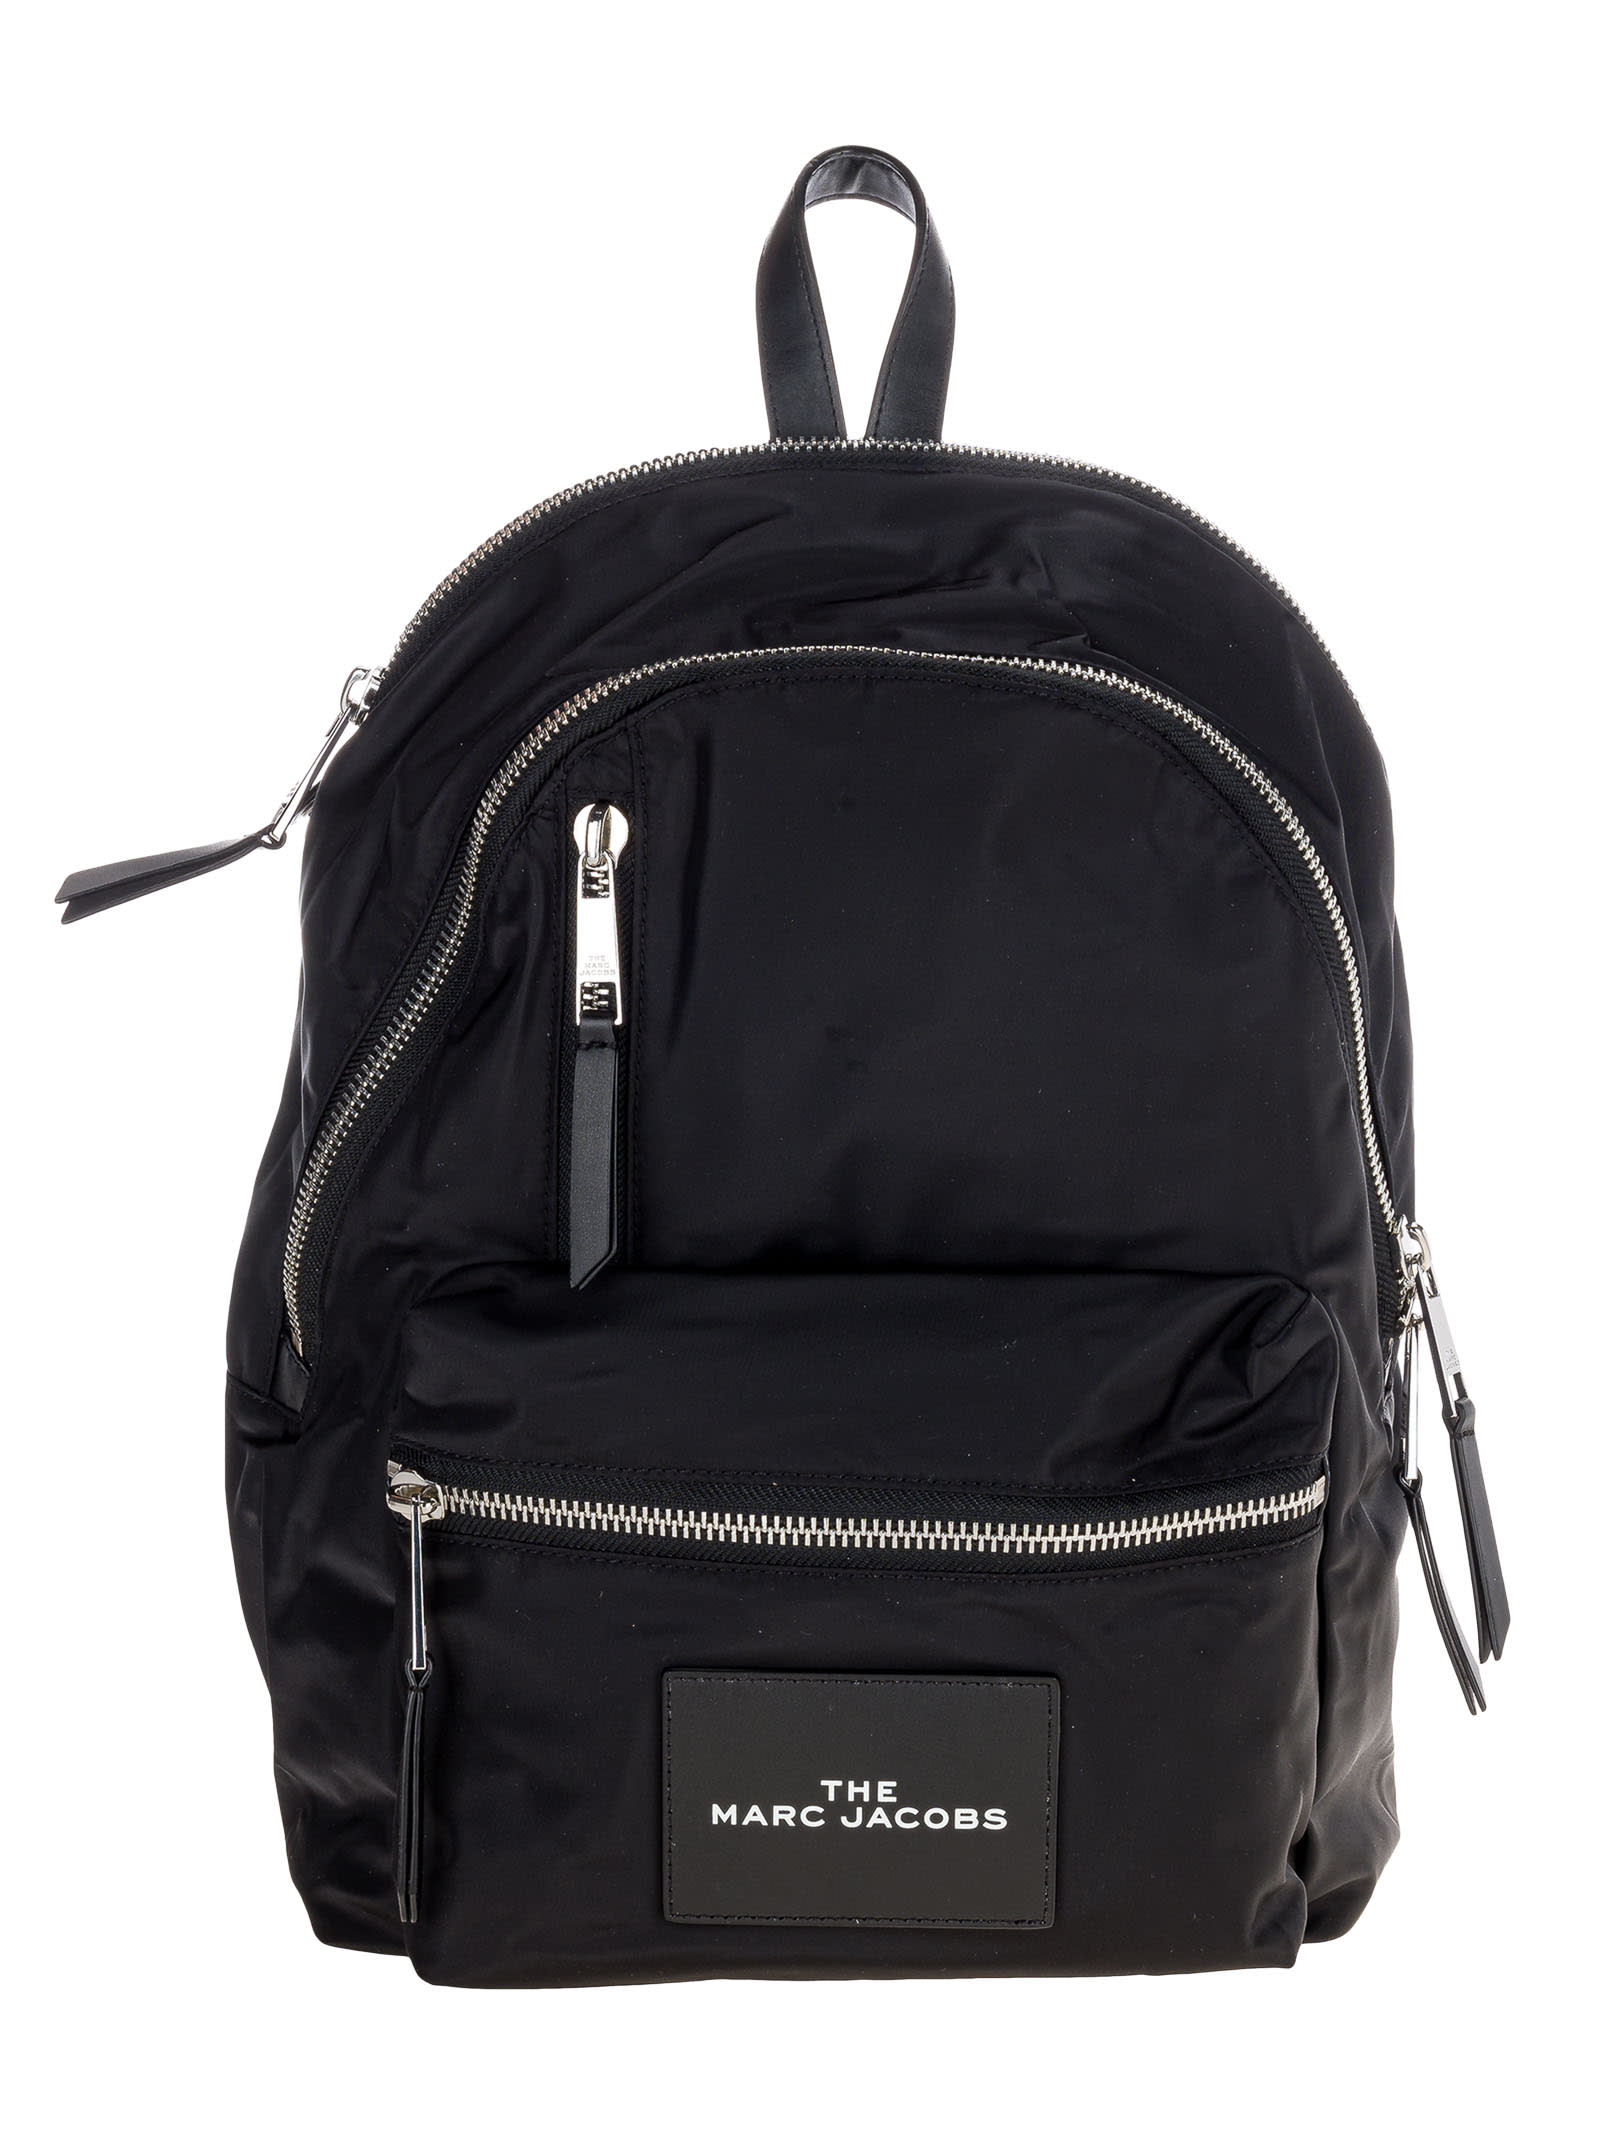 Marc Jacobs The Zipper Backpack